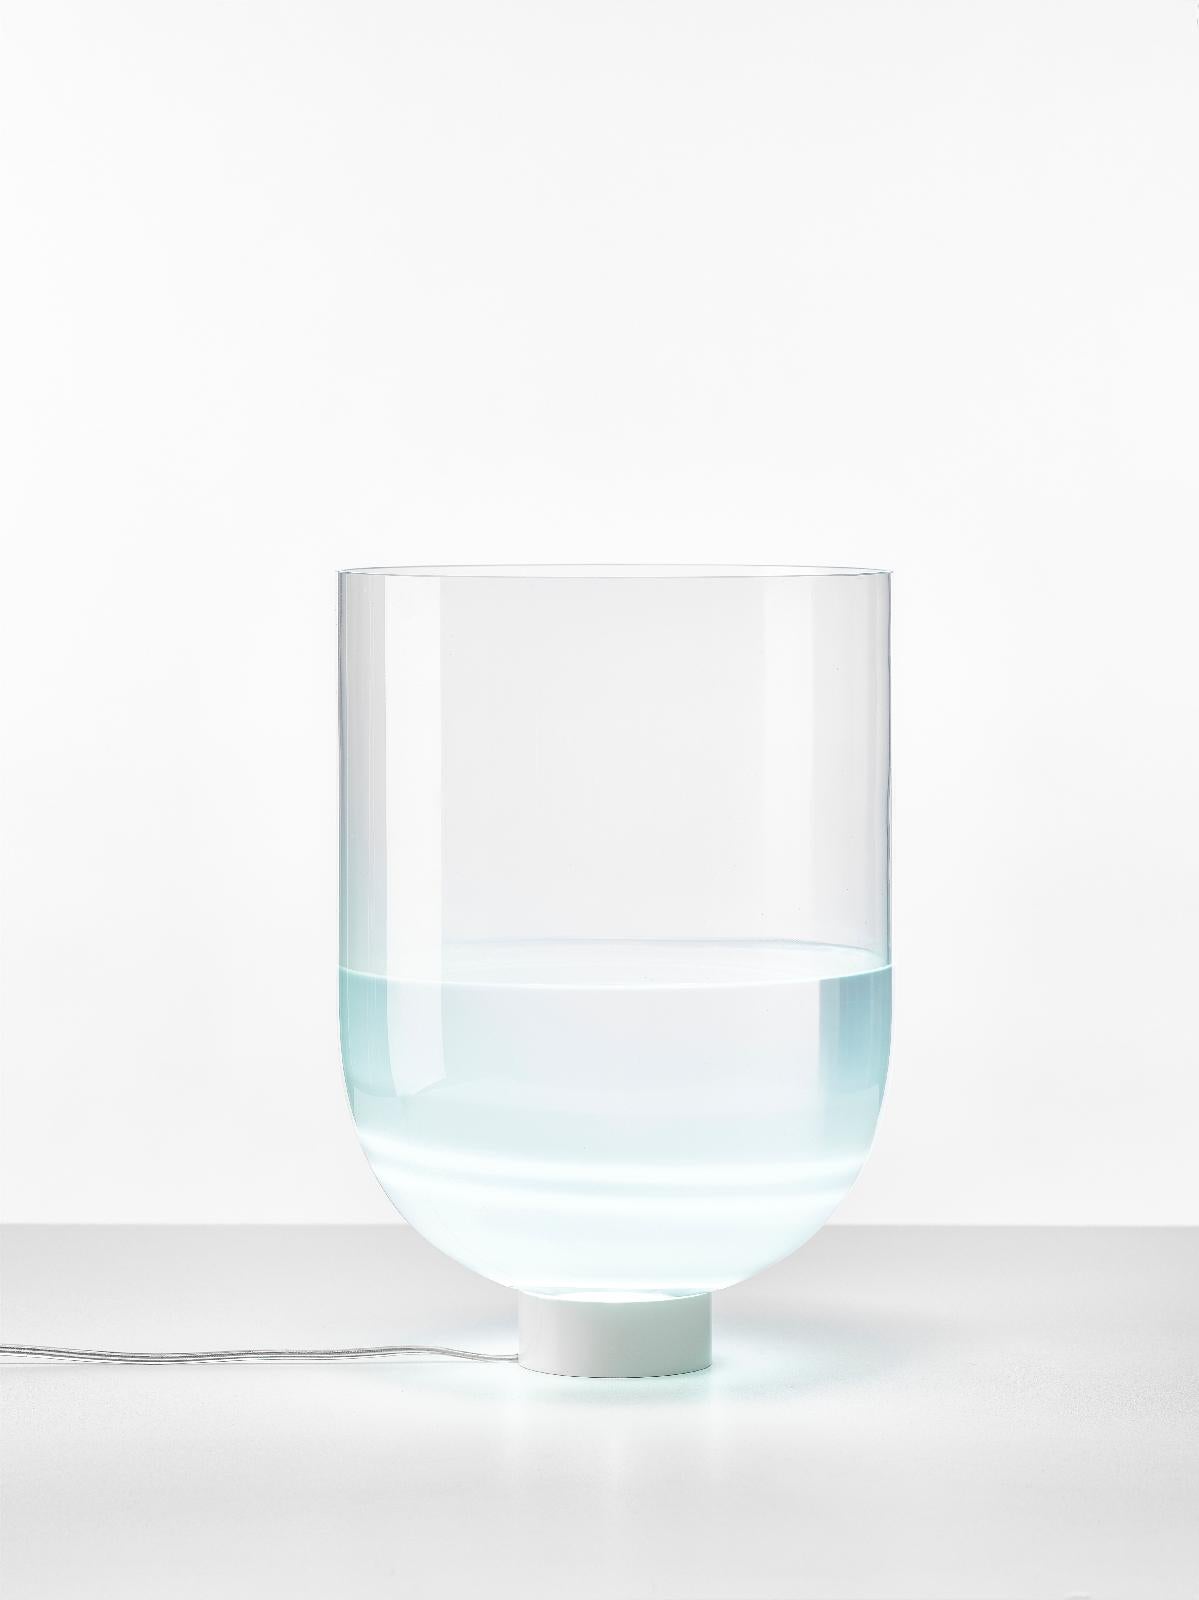 Glowing vase table lamp by Dechem Studio.
Dimensions: D 25.5 x H 38.5 cm.
Materials: glass.
Available in 2 sizes: H23.5, H38.5 cm.

Something between vase and lamp, Glowing Vase is a hybrid interior object, produced in clear cloudy glass with a